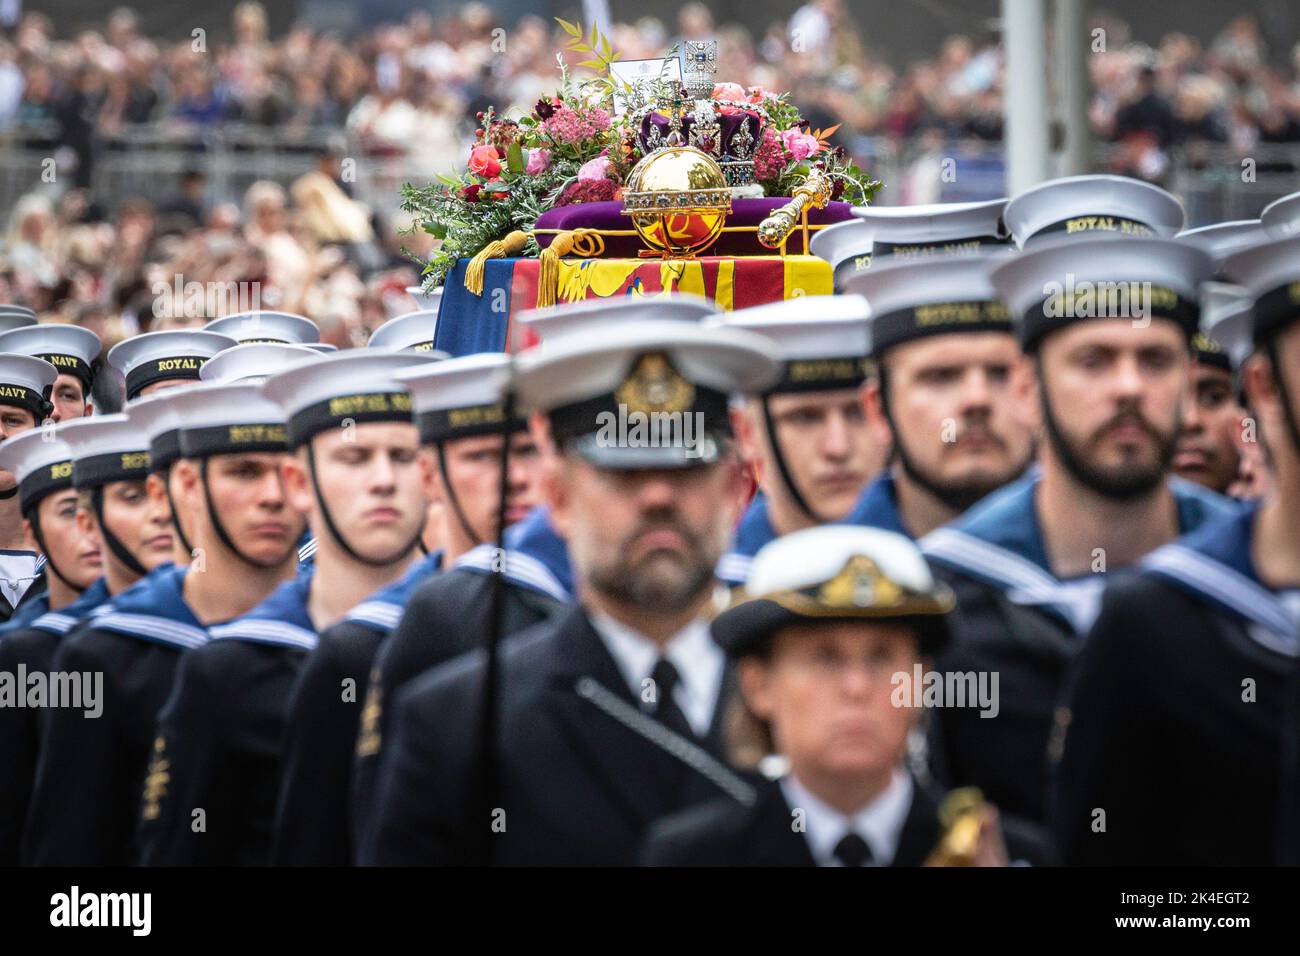 The coffin of Queen Elizabeth II is carried in her funeral procession through London, 22 September 2022, England, United Kingdom Stock Photo